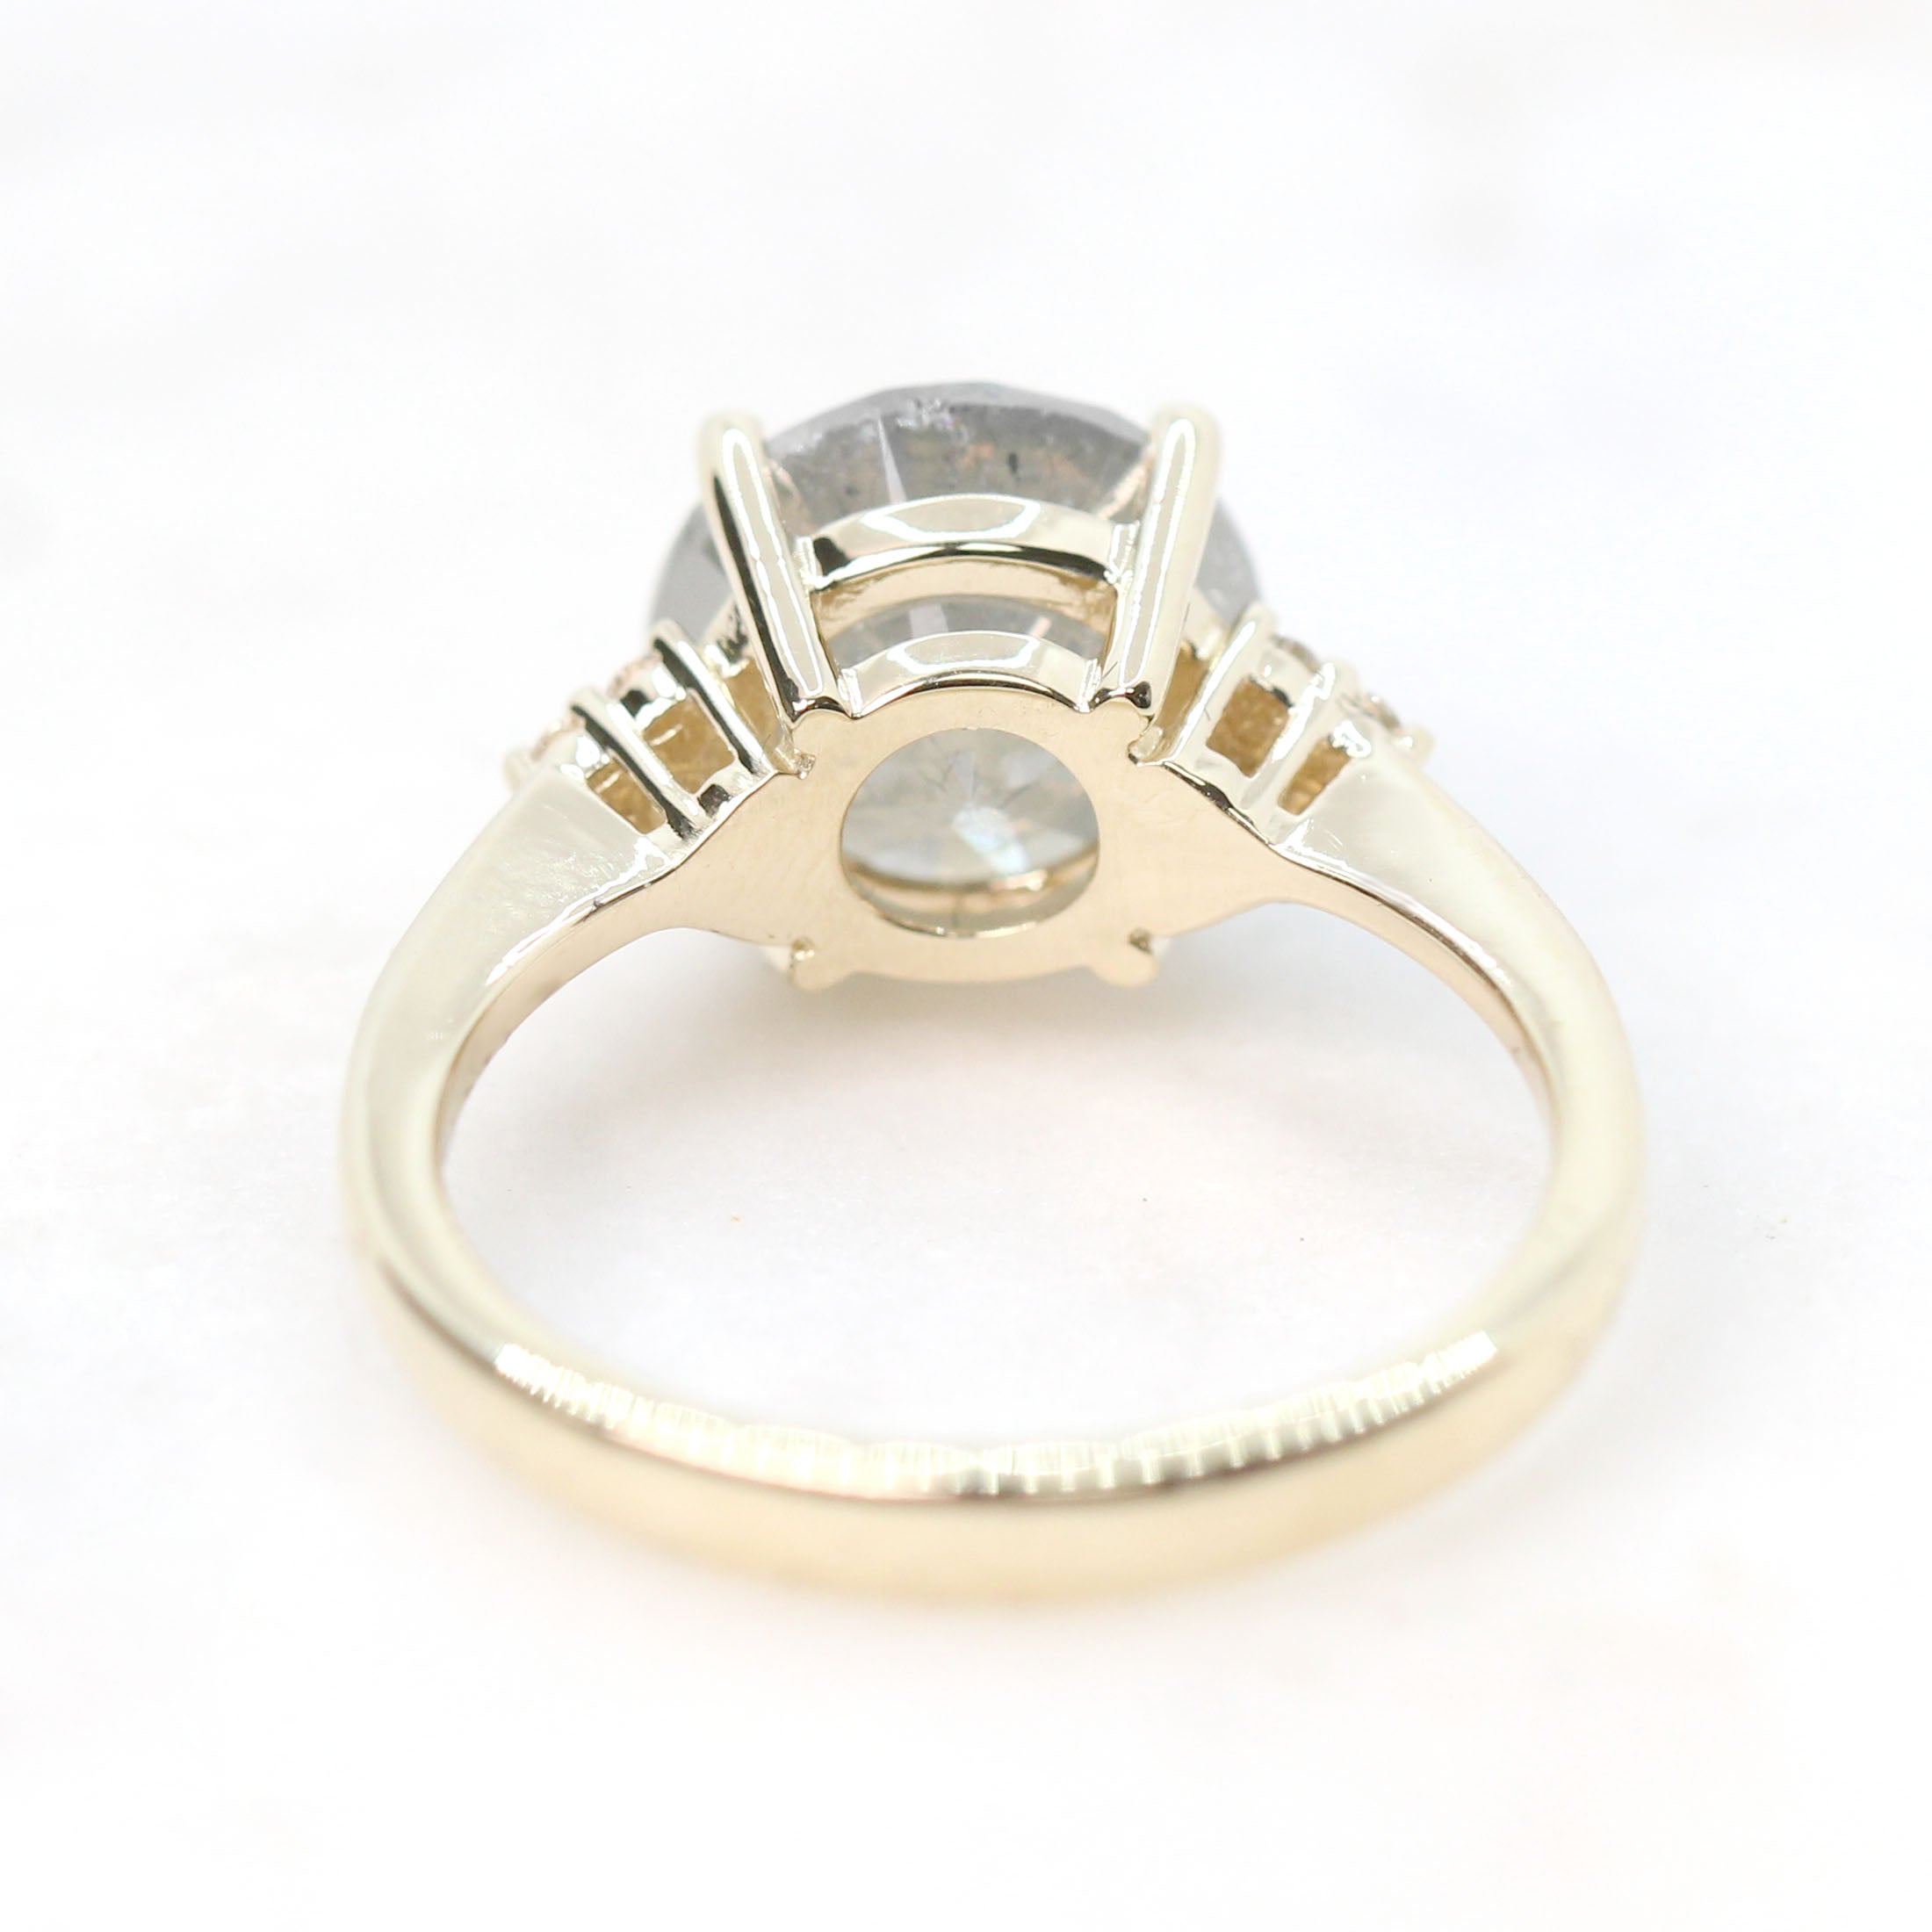 Imogene Ring with a 4.01 Carat Round Gray Sunset Diamond and White Accent Diamonds in 14k Yellow Gold - Ready to Size and Ship - Midwinter Co. Alternative Bridal Rings and Modern Fine Jewelry